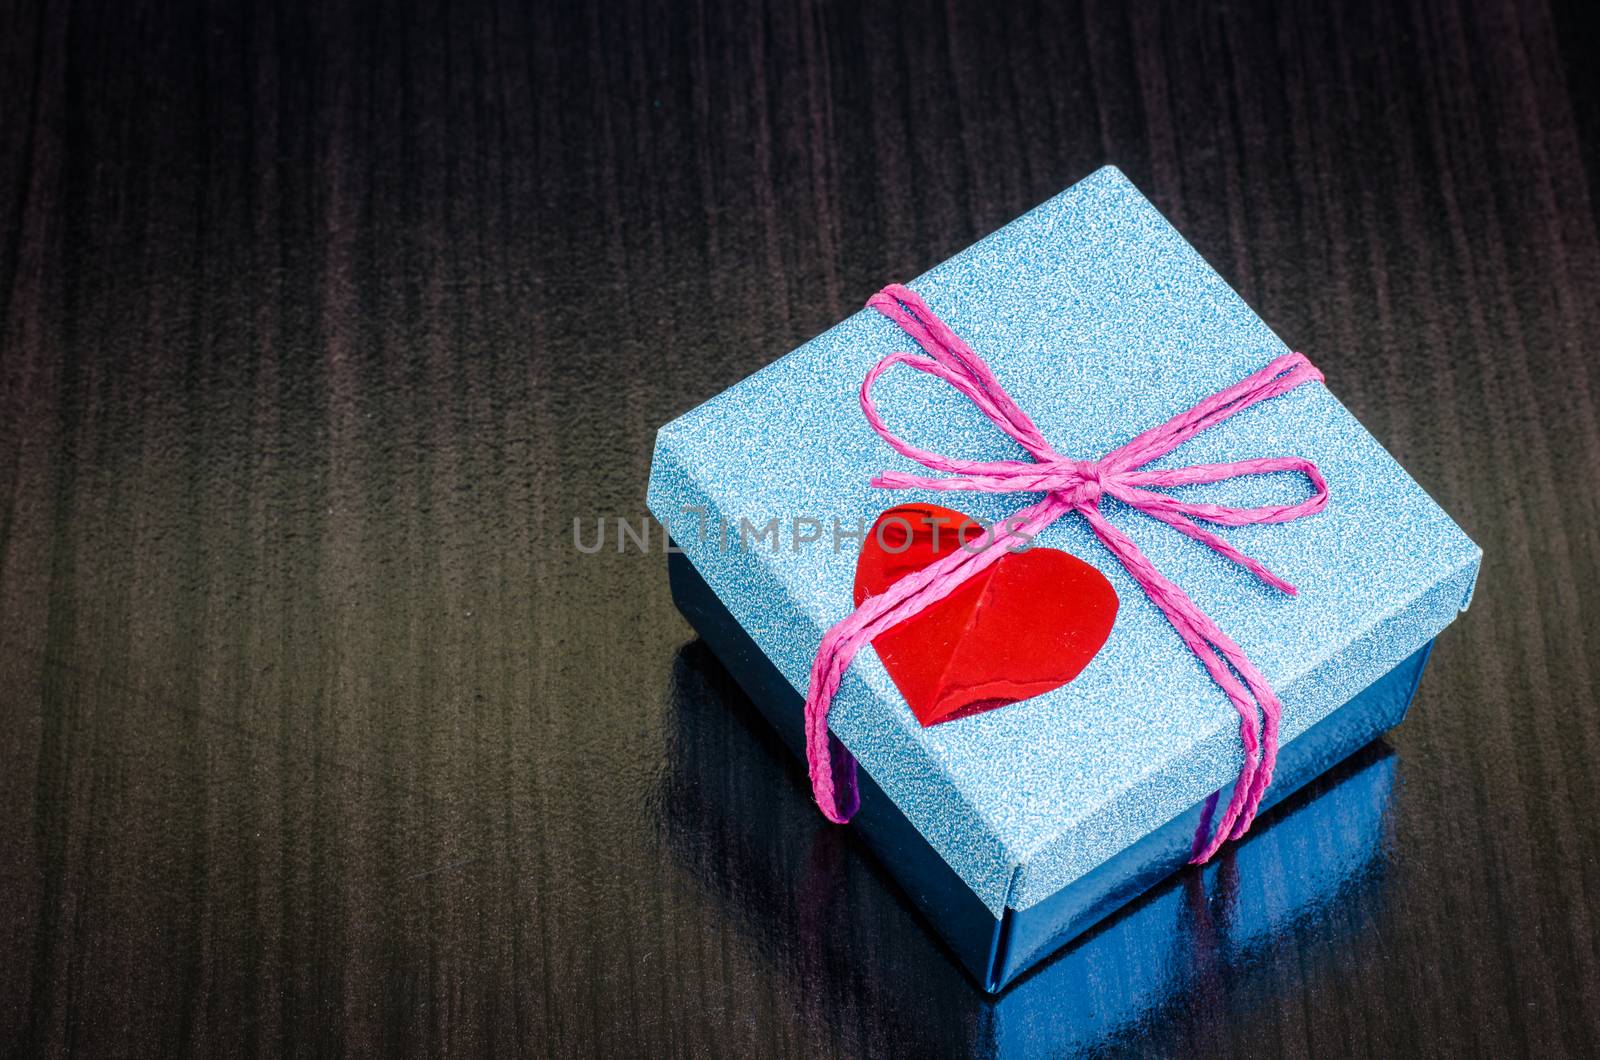 gift box on wooden background.